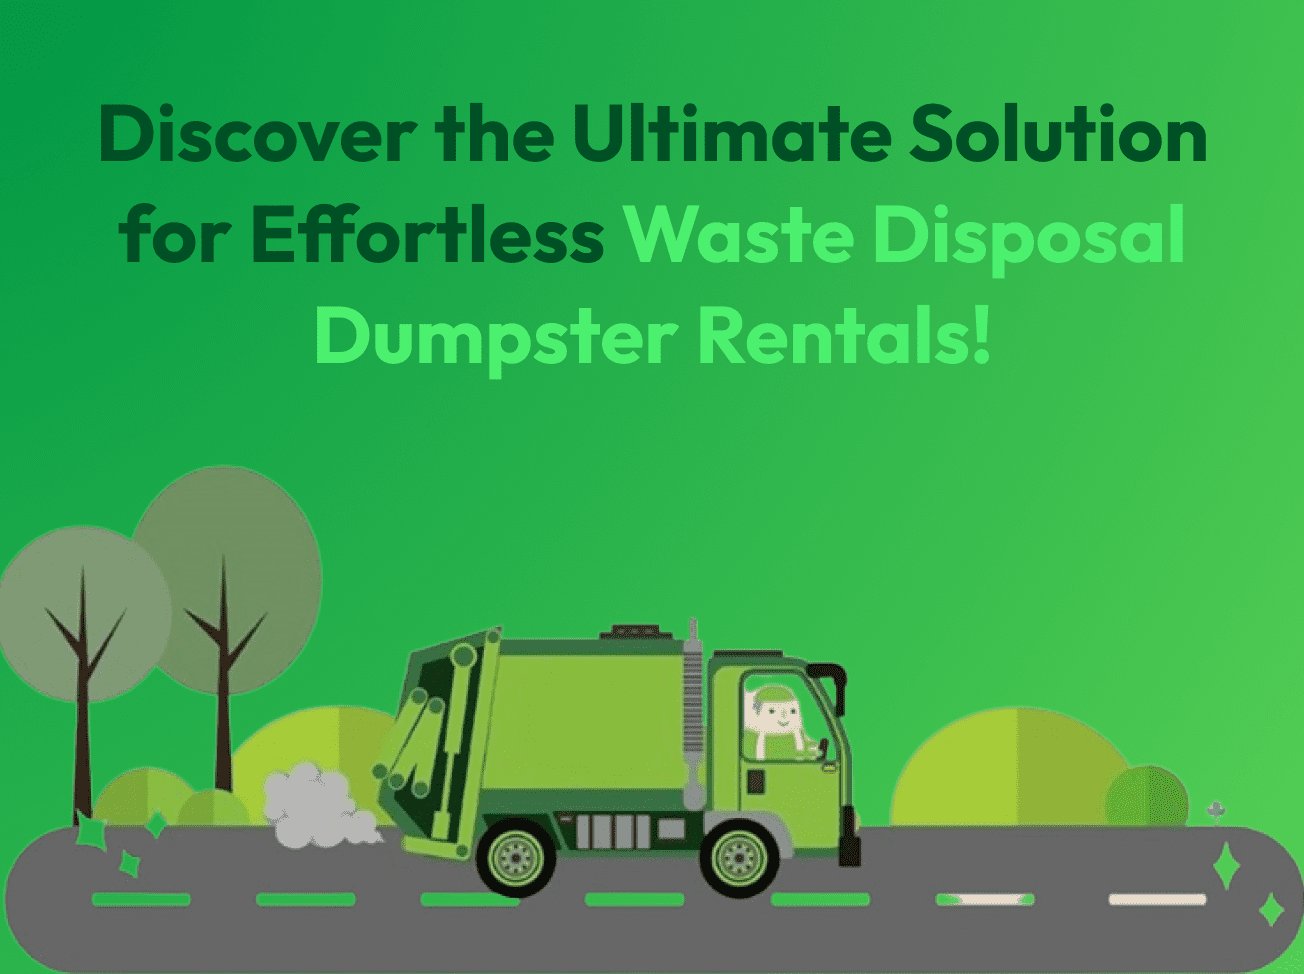 Solutions for effortless waste disposal using dumpsters rentals.